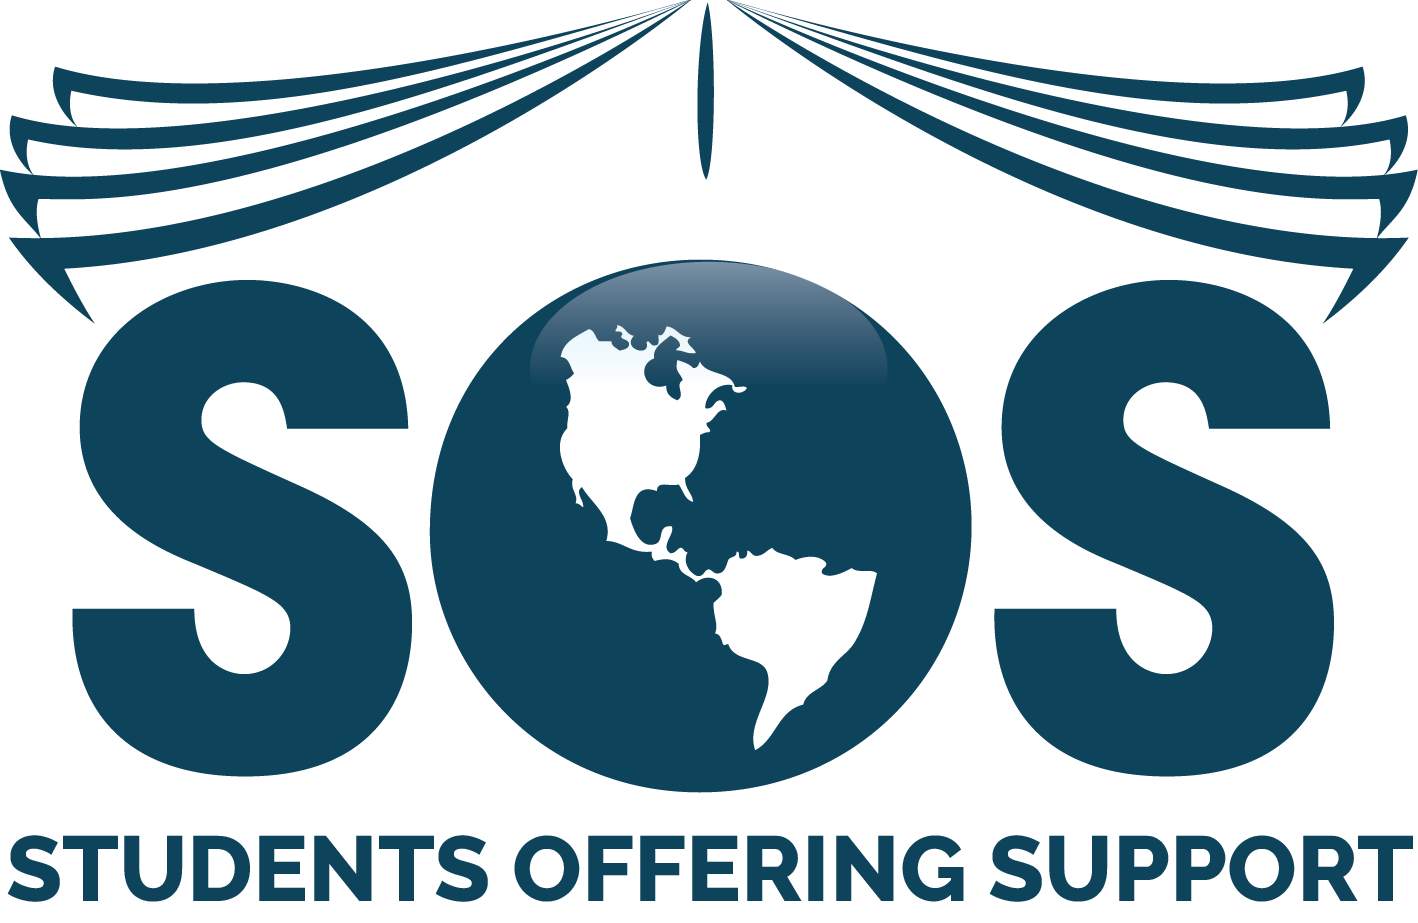 STUDENTS OFFERING SUPPORT logo